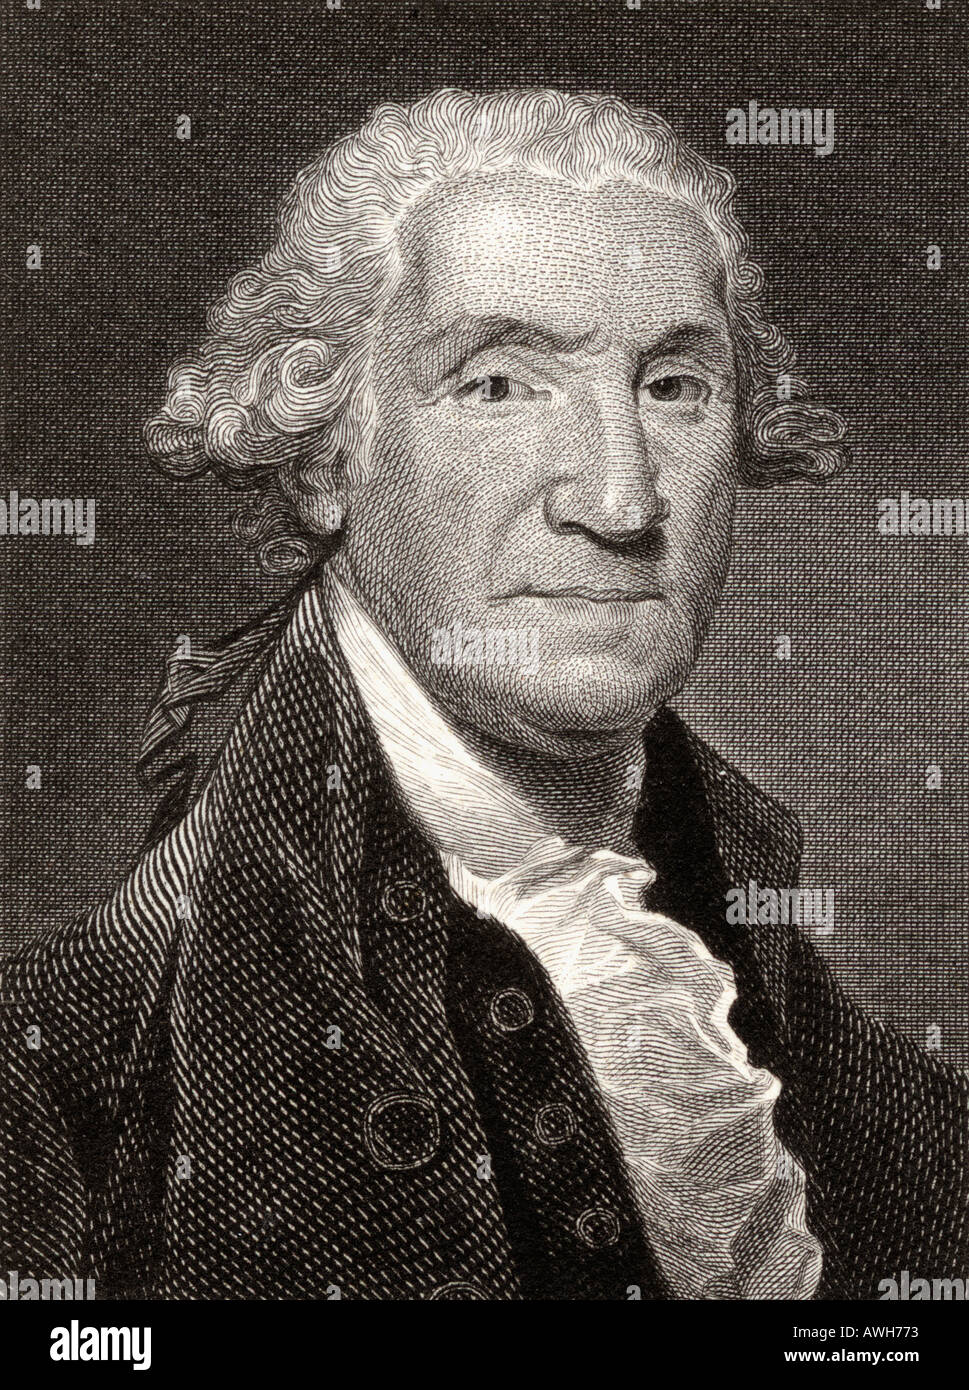 George Washington, 1732 - 1799.  American political leader, military general, statesman, and Founding Father.  First President of the United States. Stock Photo